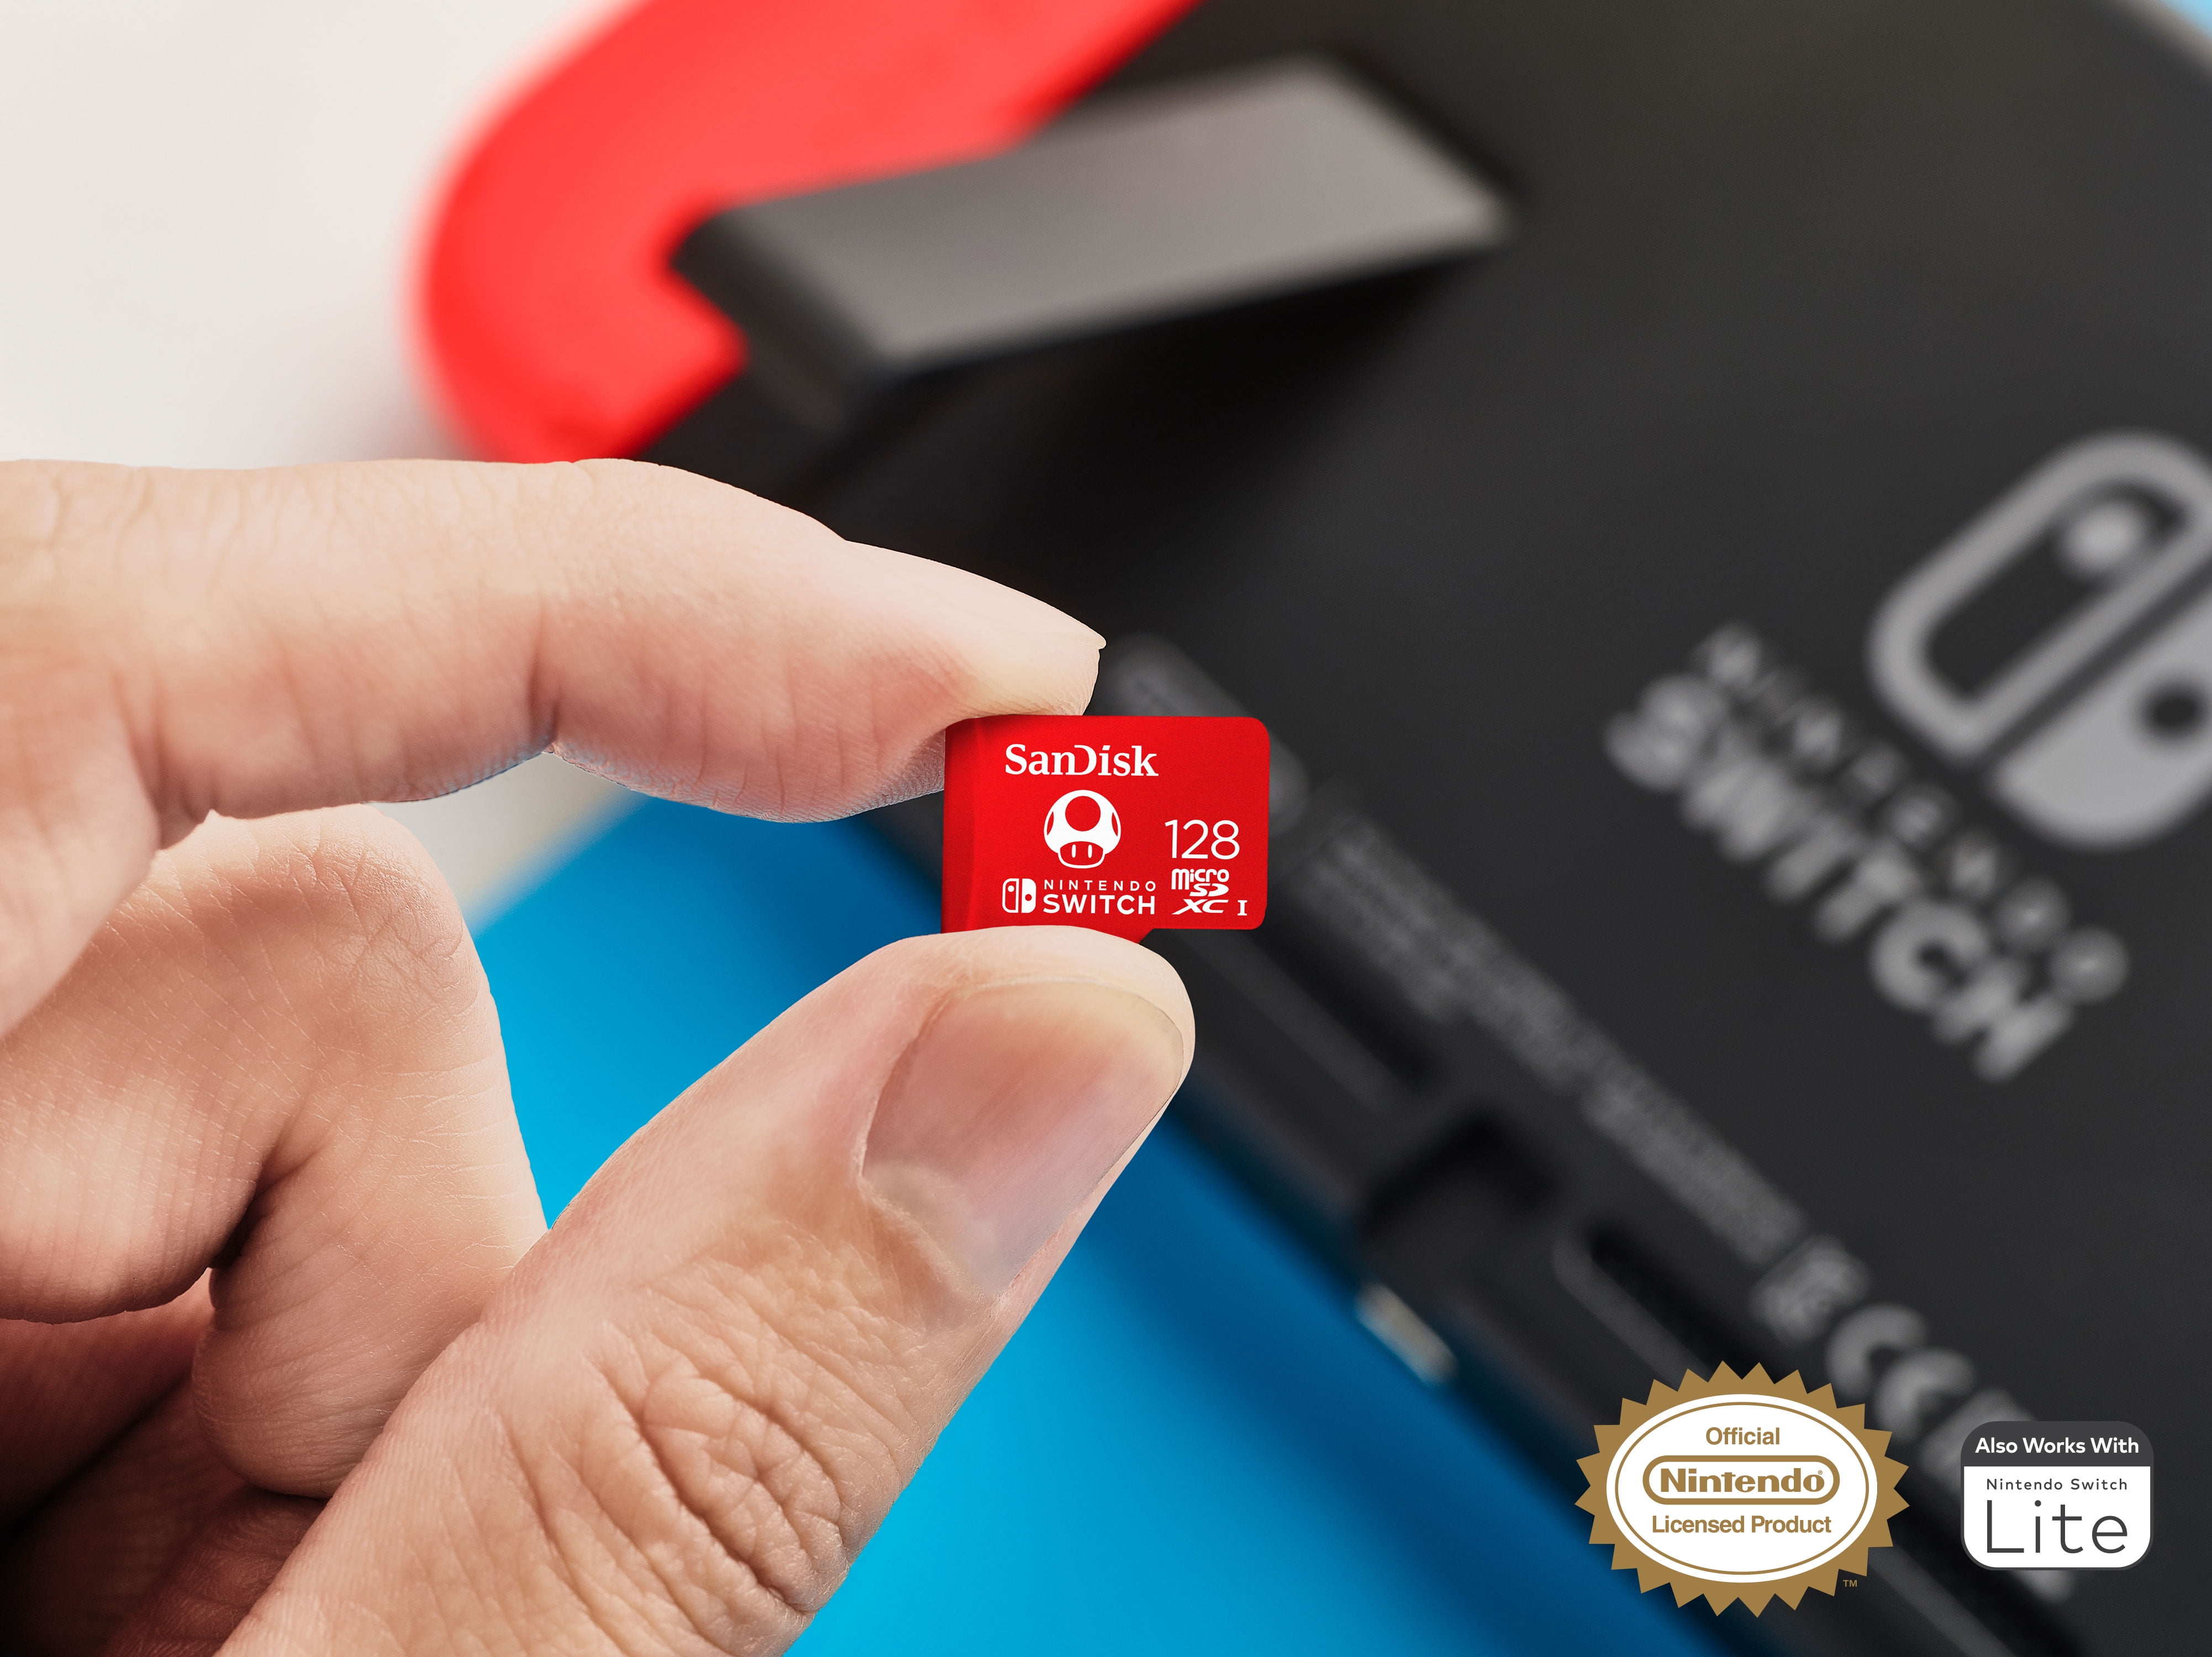 SanDisk 128GB microSDXC UHS-I Memory Card Licensed for Nintendo Switch, Red  - 100MB/s, Micro SD Card - SDSQXBO-128G-AWCZA 